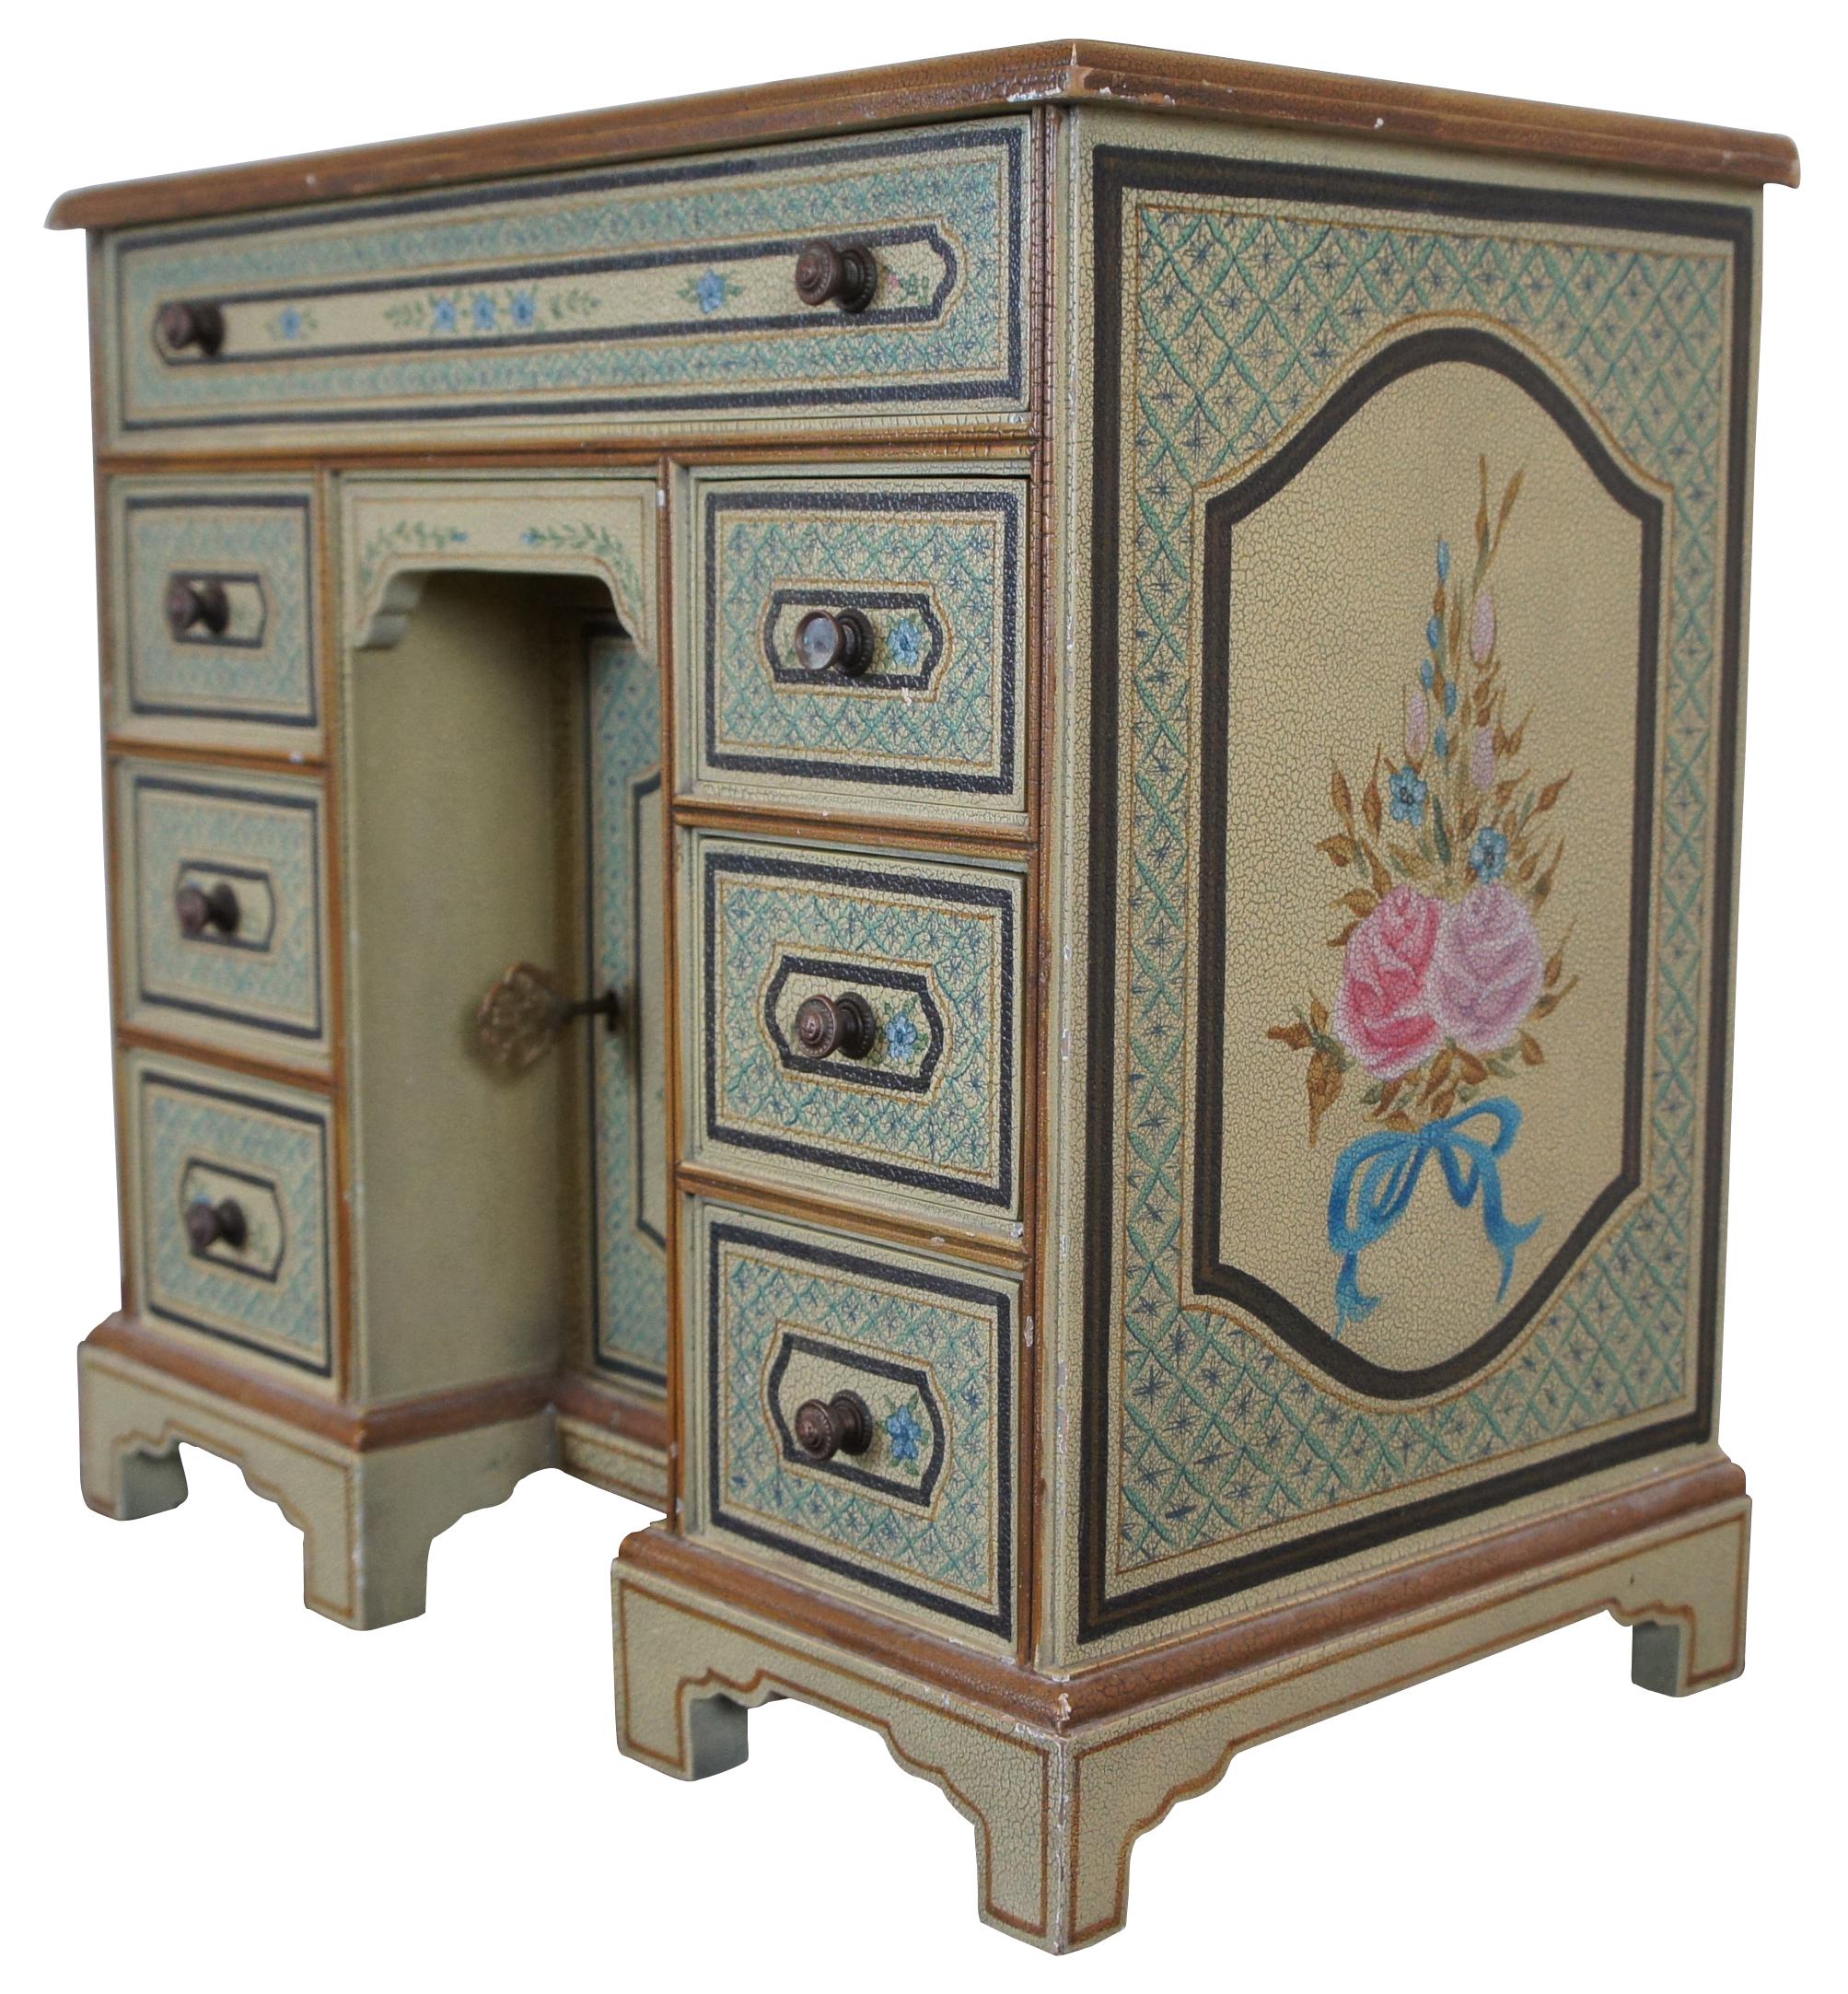 Vintage Maitland Smith dresser top valet or jewelry box in the shape of a Georgian knee hole writing desk, intricately hand painted with a lattice pattern accented with forget-me-nots and and artistically distressed with a crackle or alligator